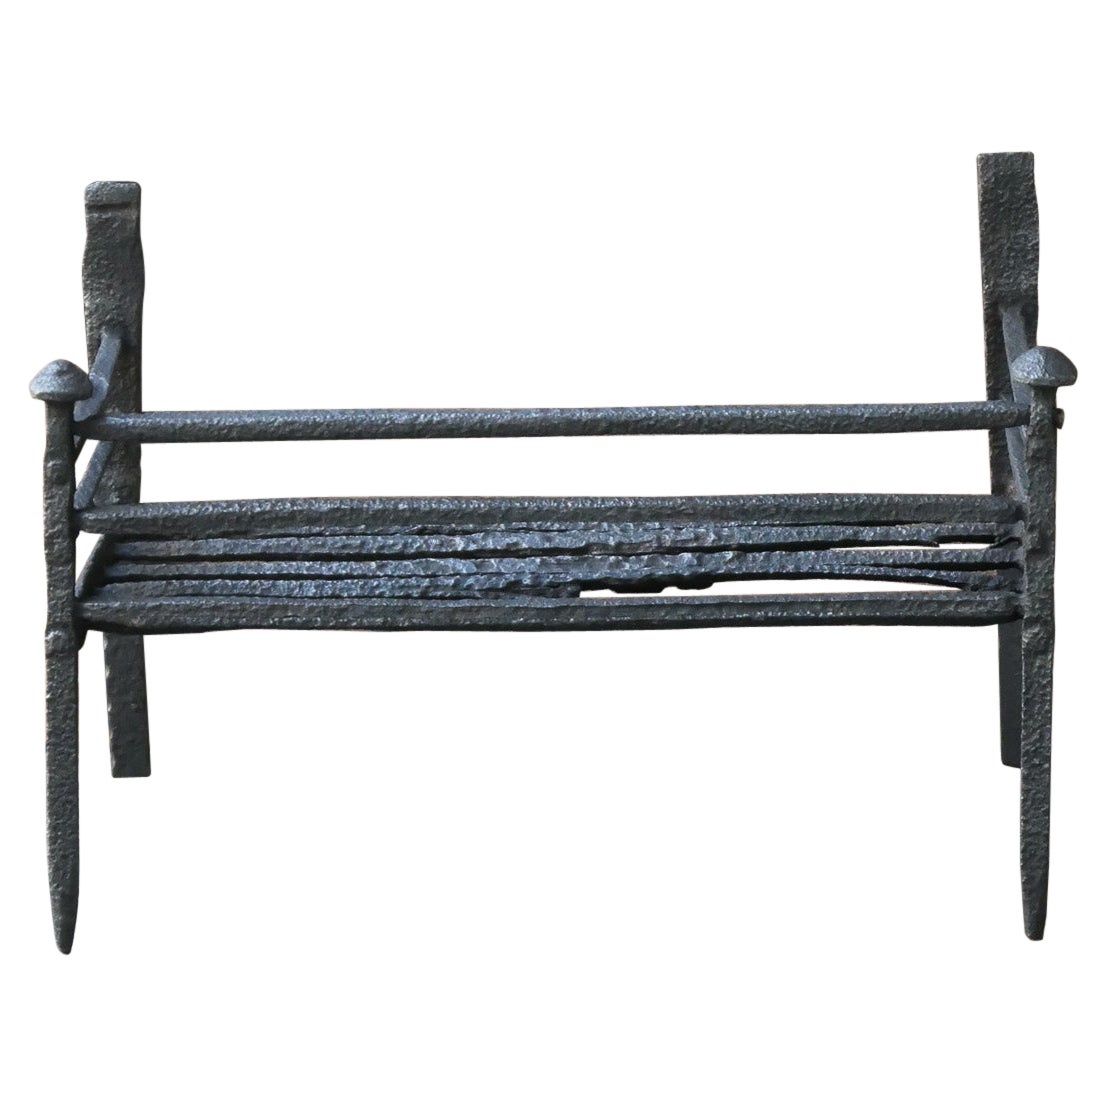 Antique French Gothic Fireplace Grate or Fire Basket, 17th - 18th Century